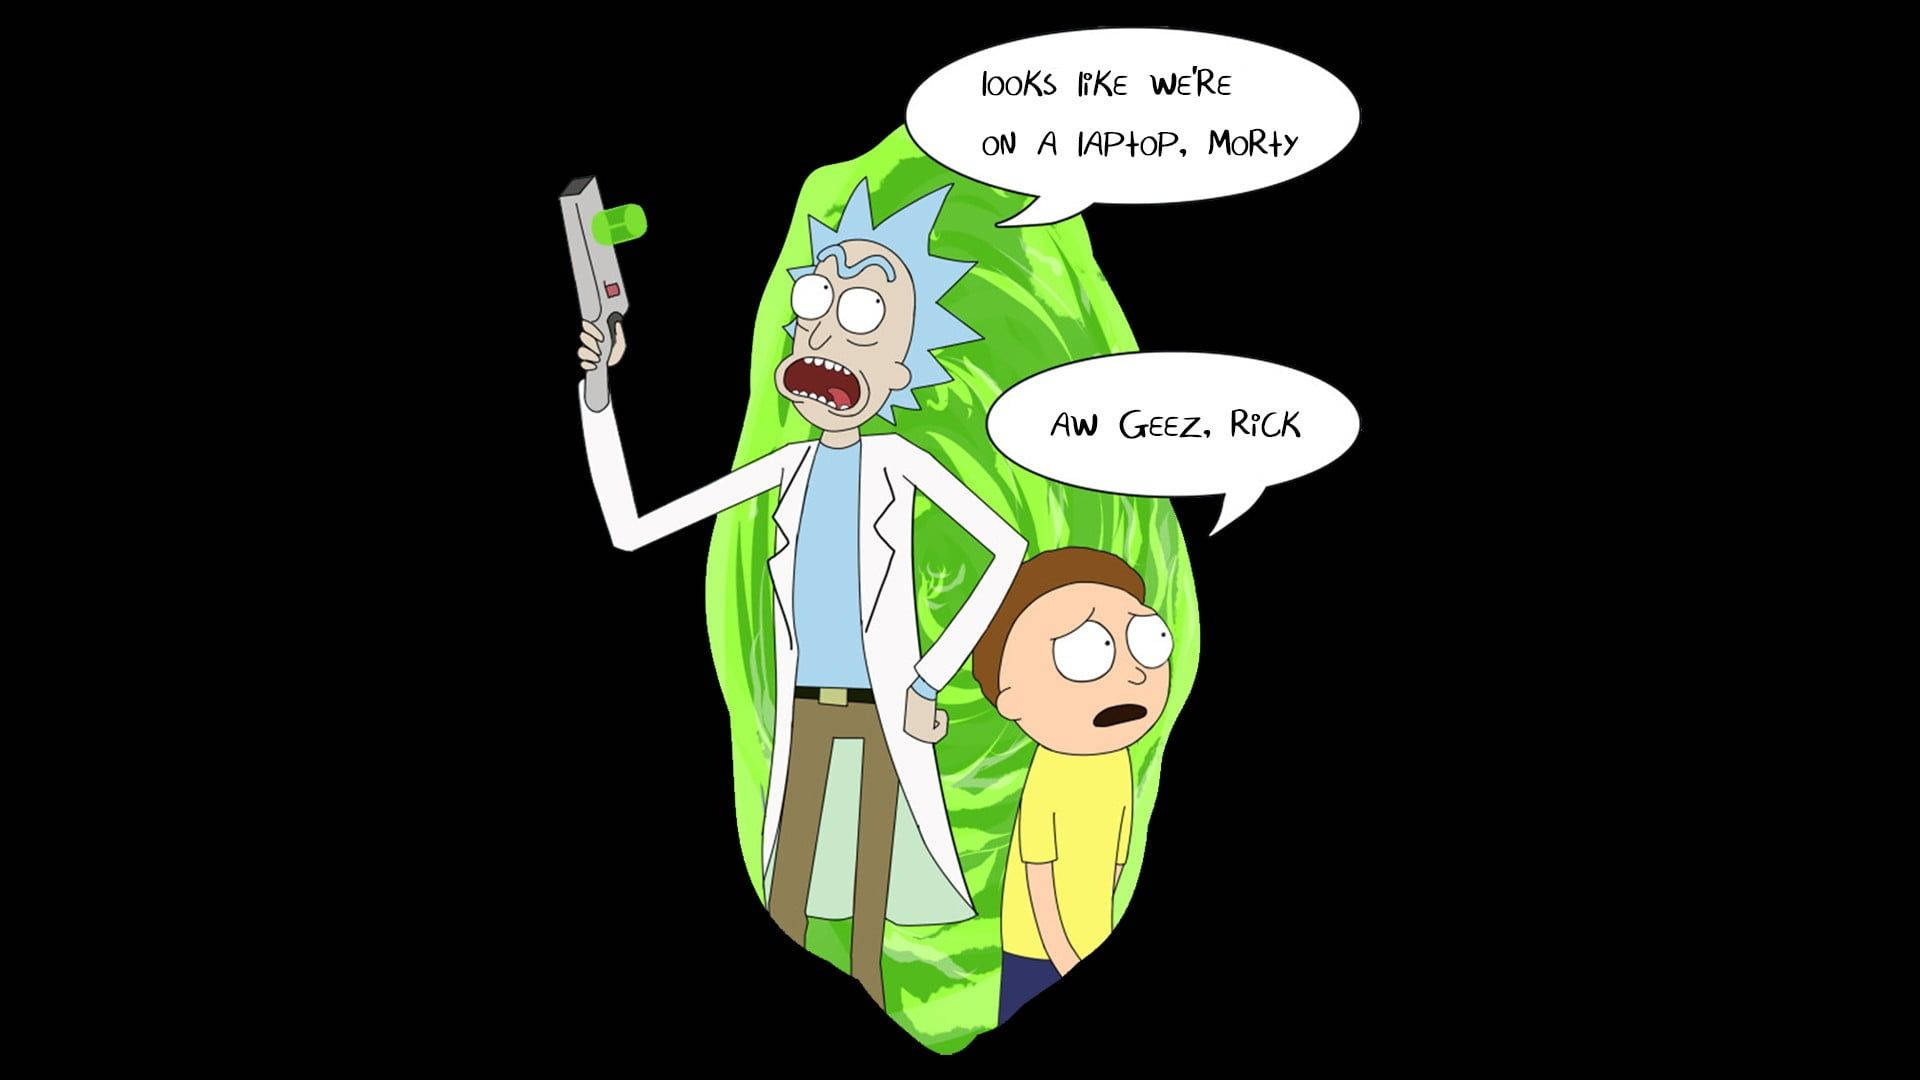 Nothing Gets Me Through The Day Like A Good Rick & Morty Dank Meme